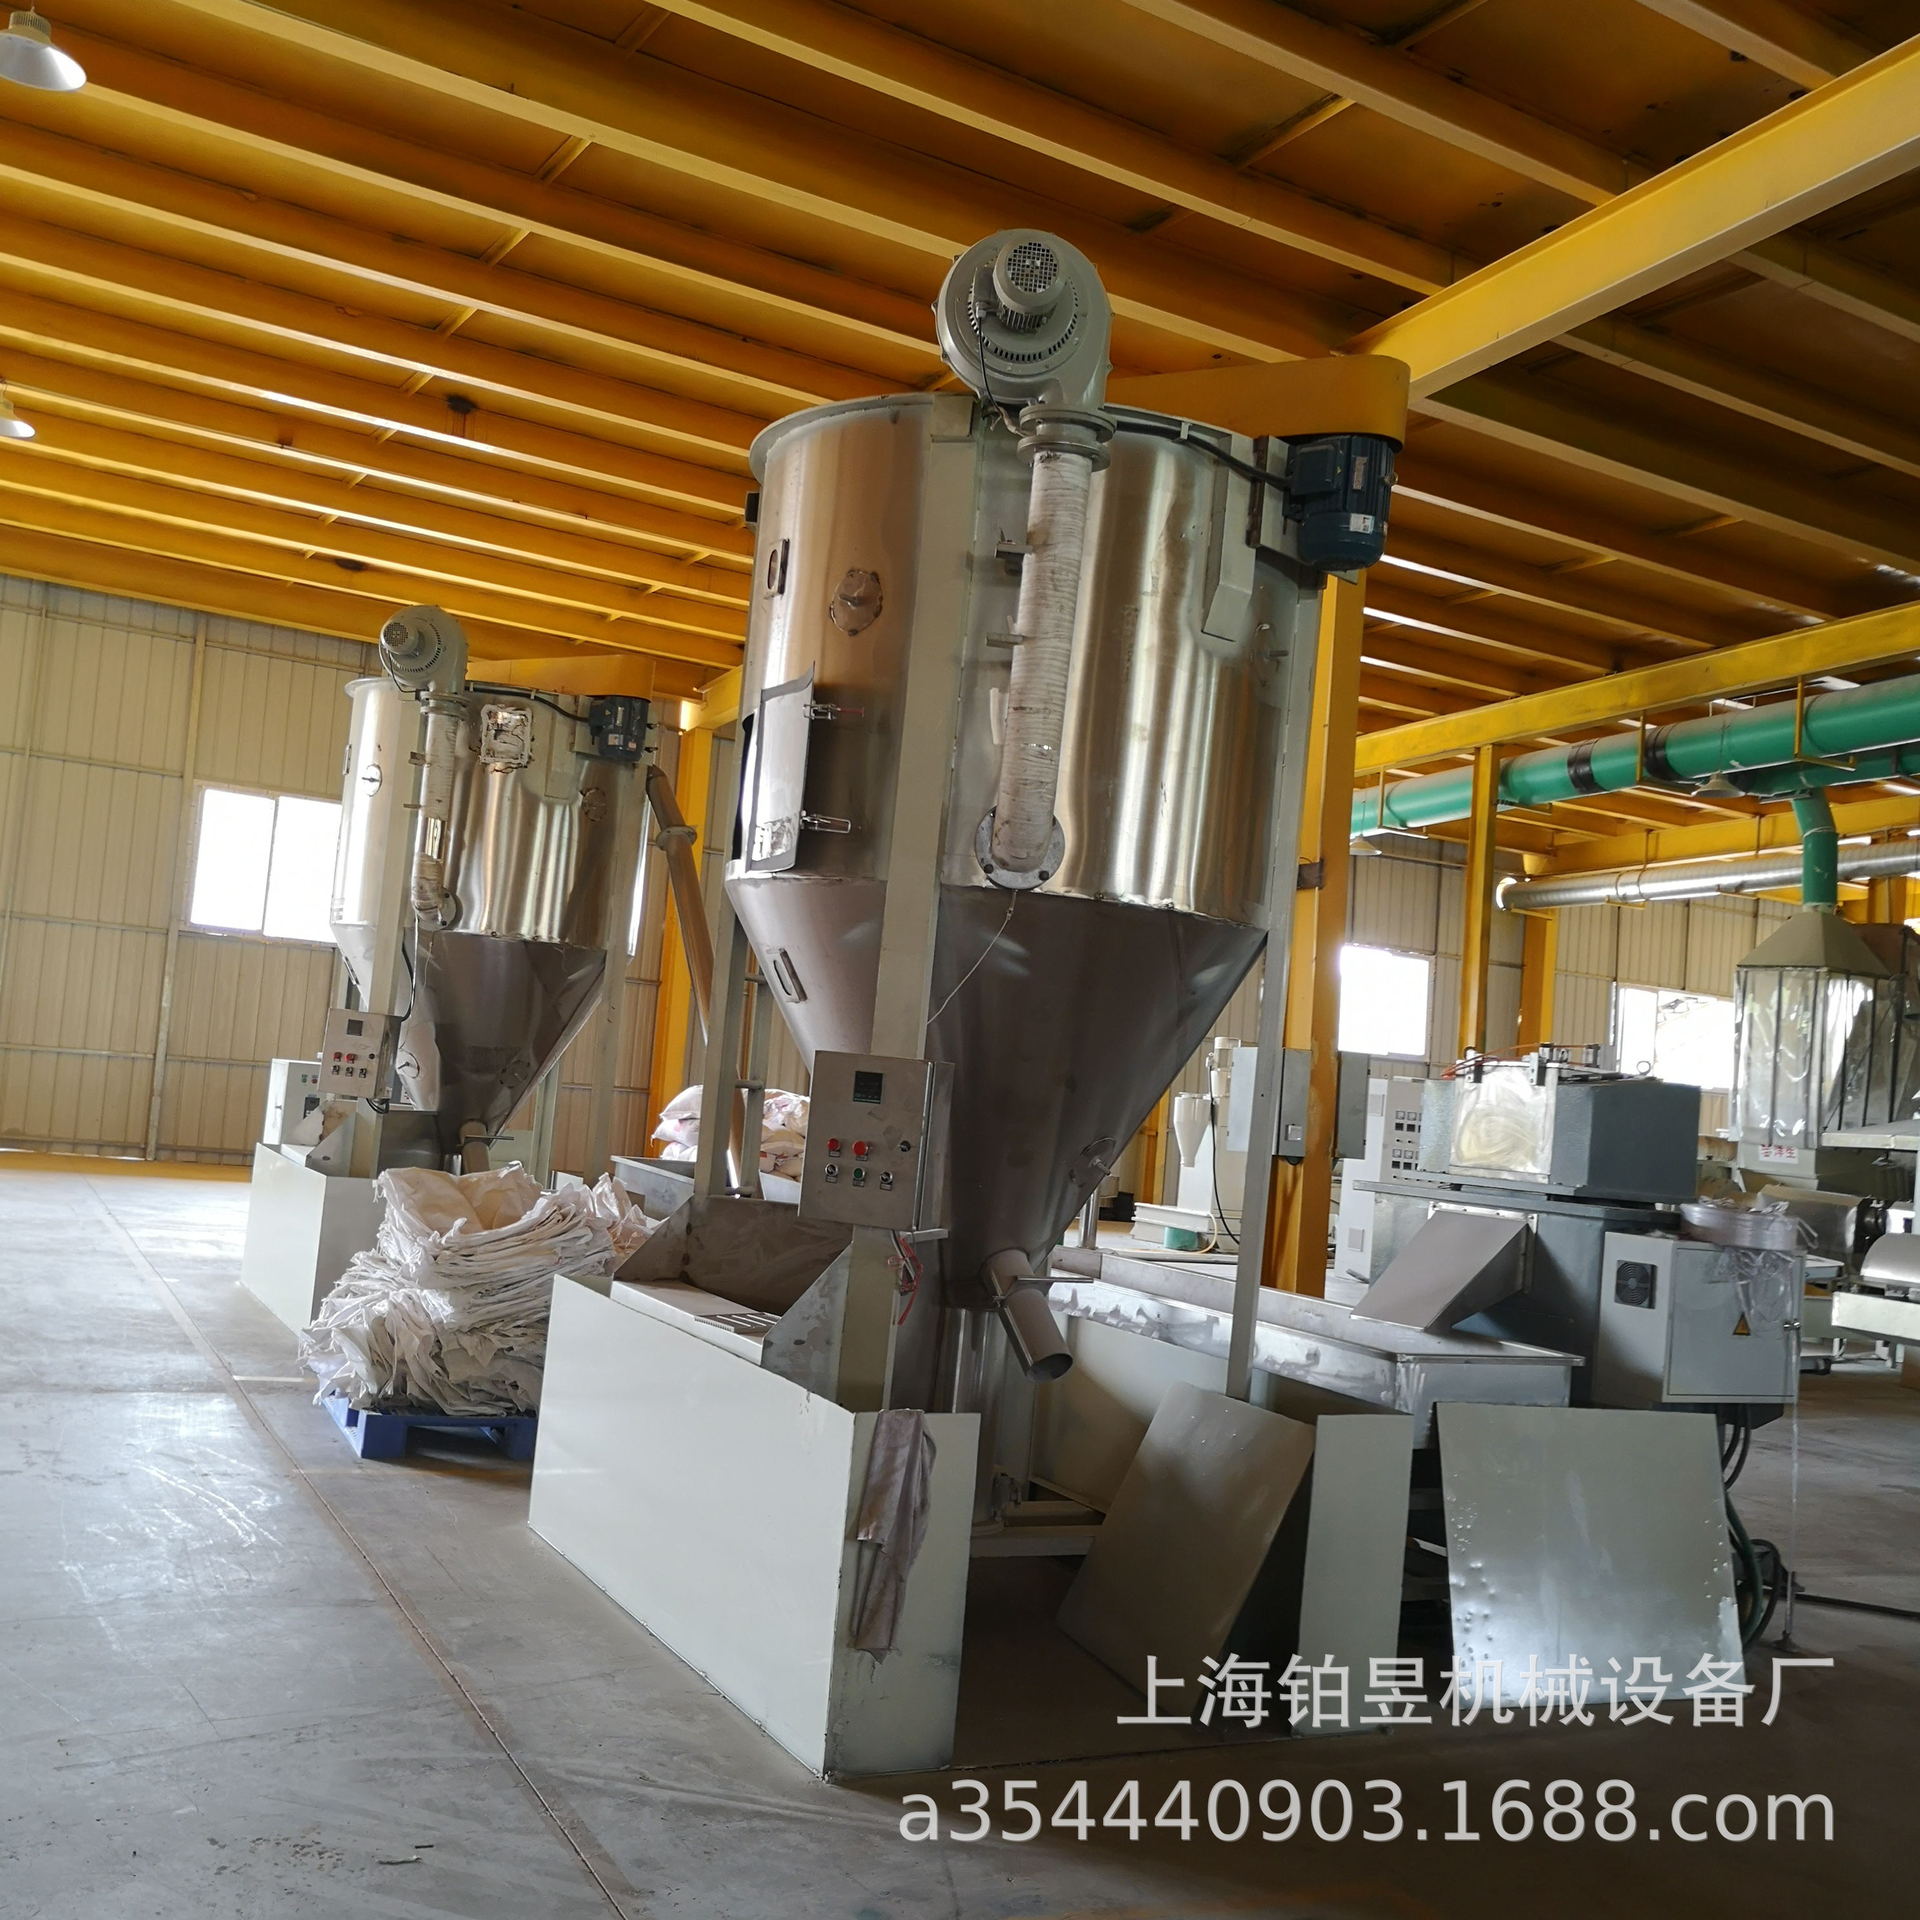 [Professional manufacture Preferential supply] 500KG-10T Plastic mixer large vertical Mixer chart)